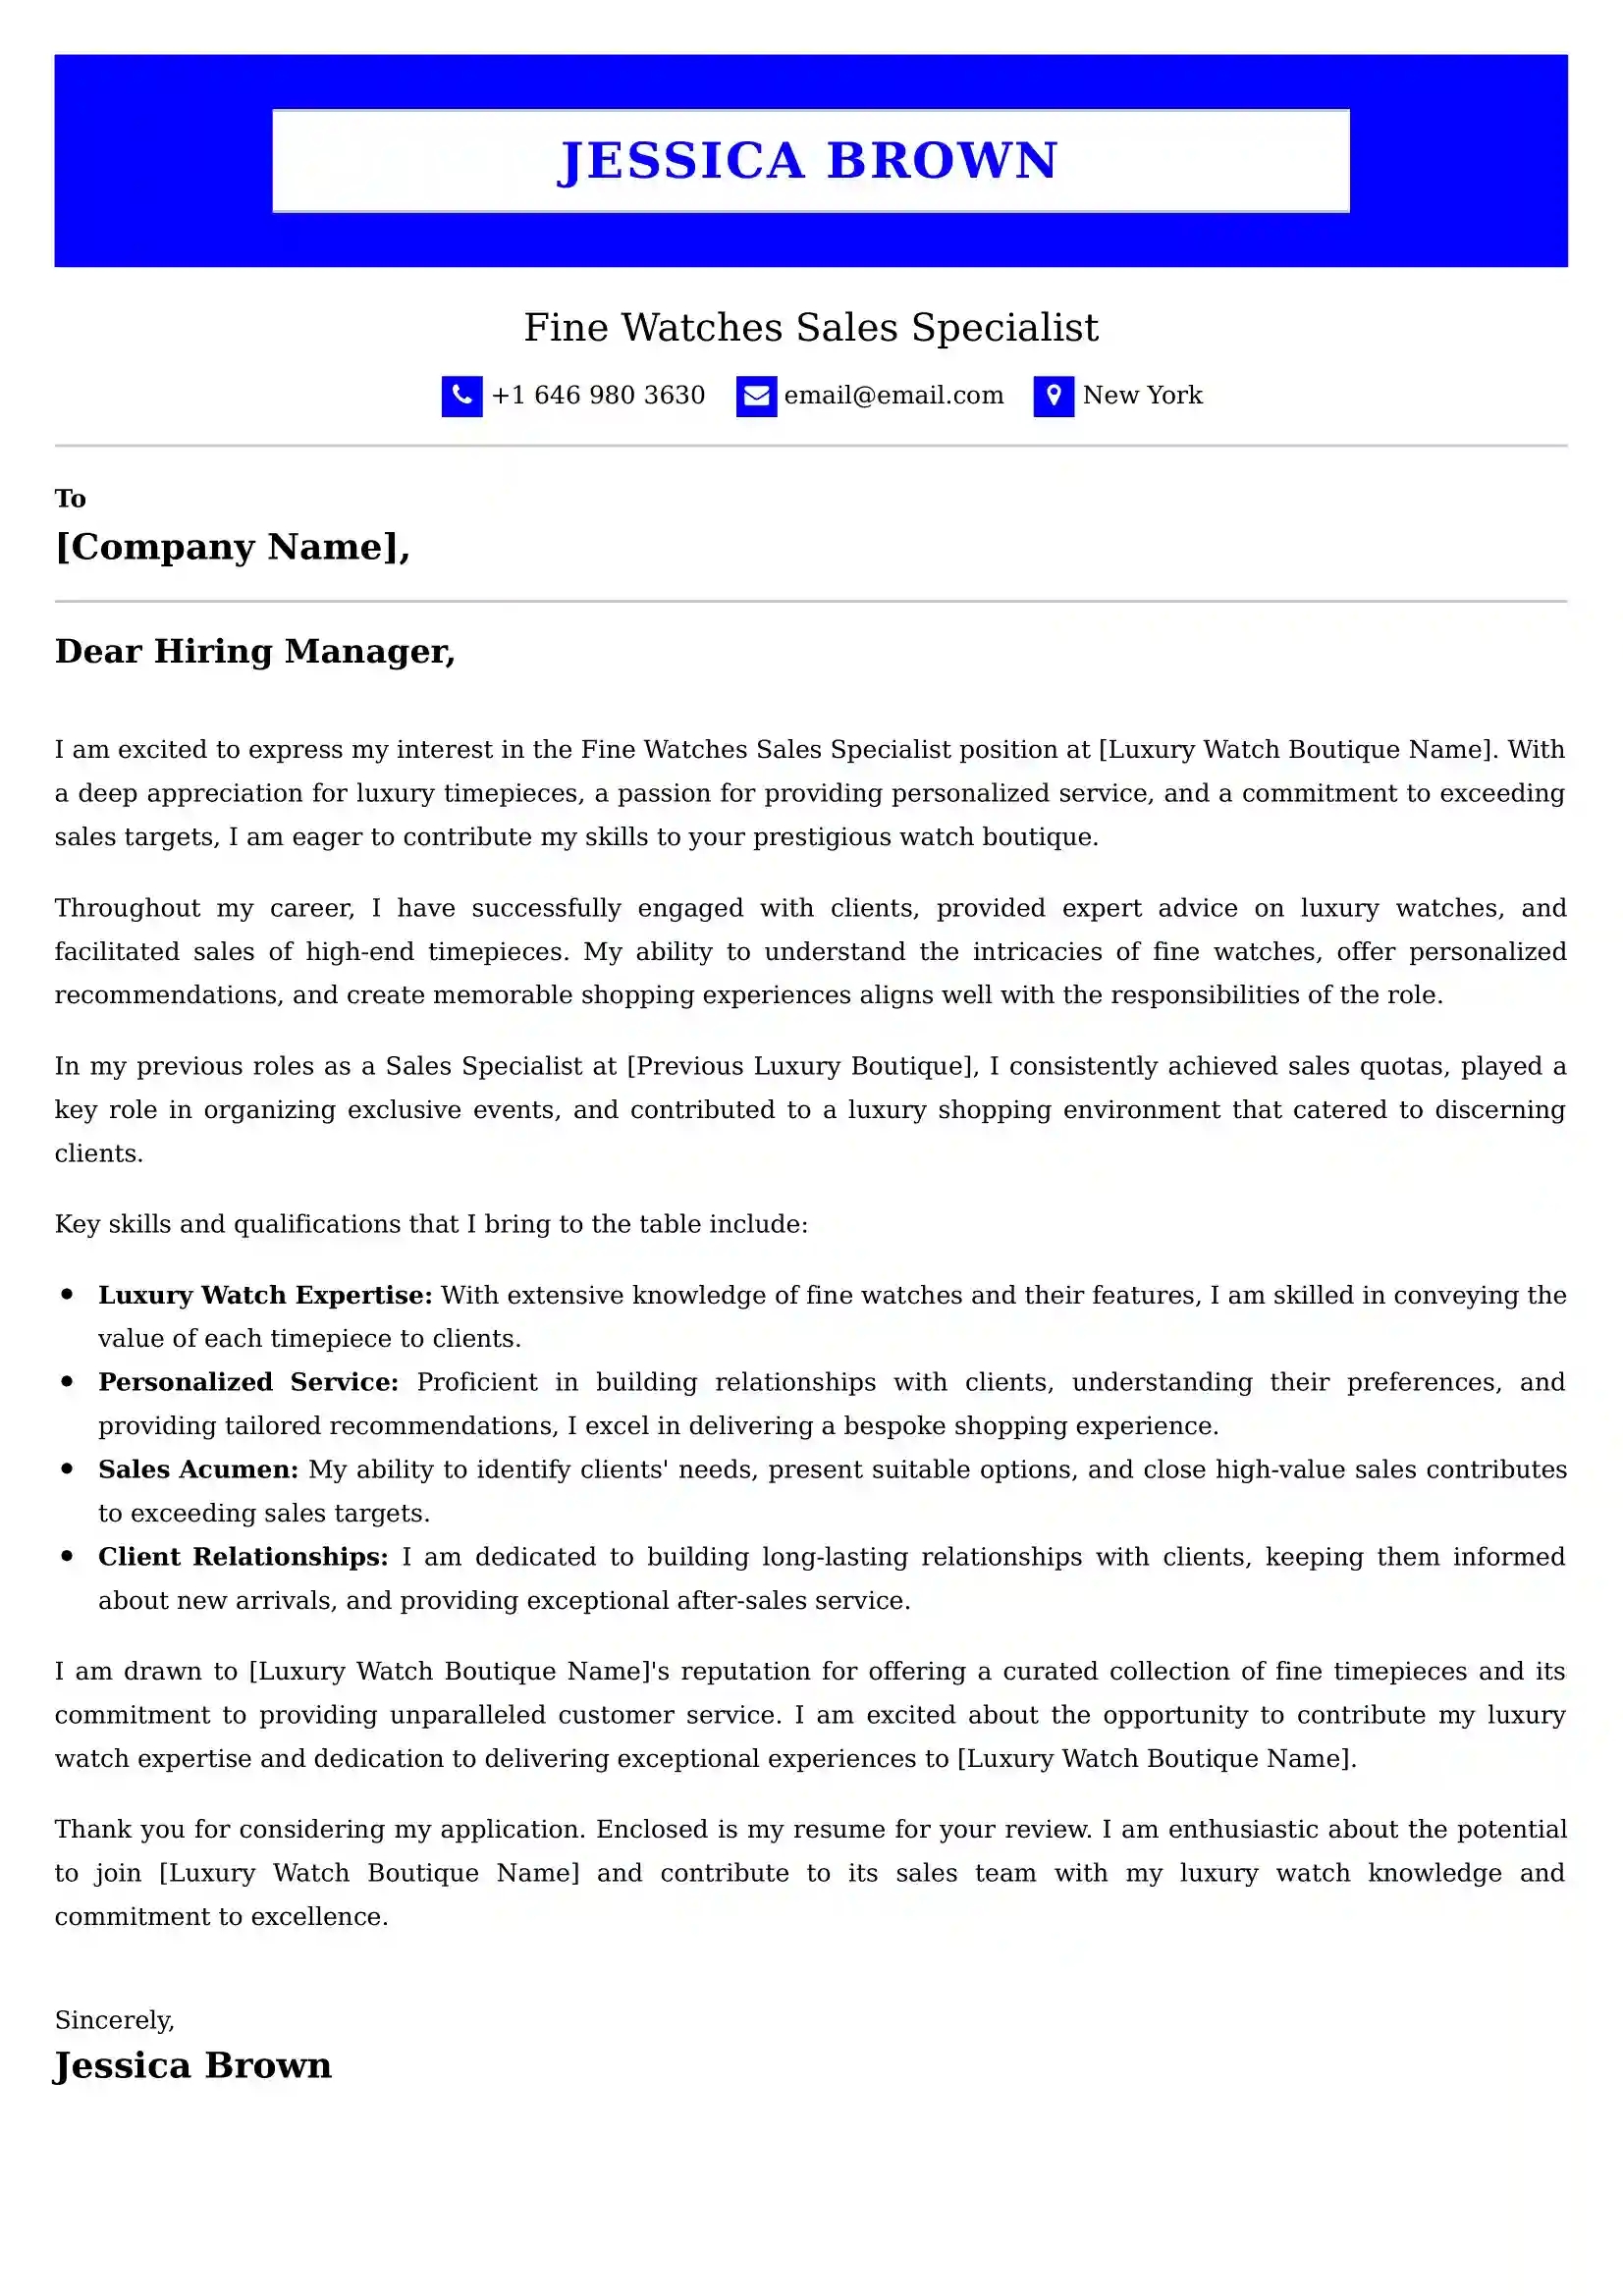 Fine Watches Sales Specialist Cover Letter Examples - Latest UK Format